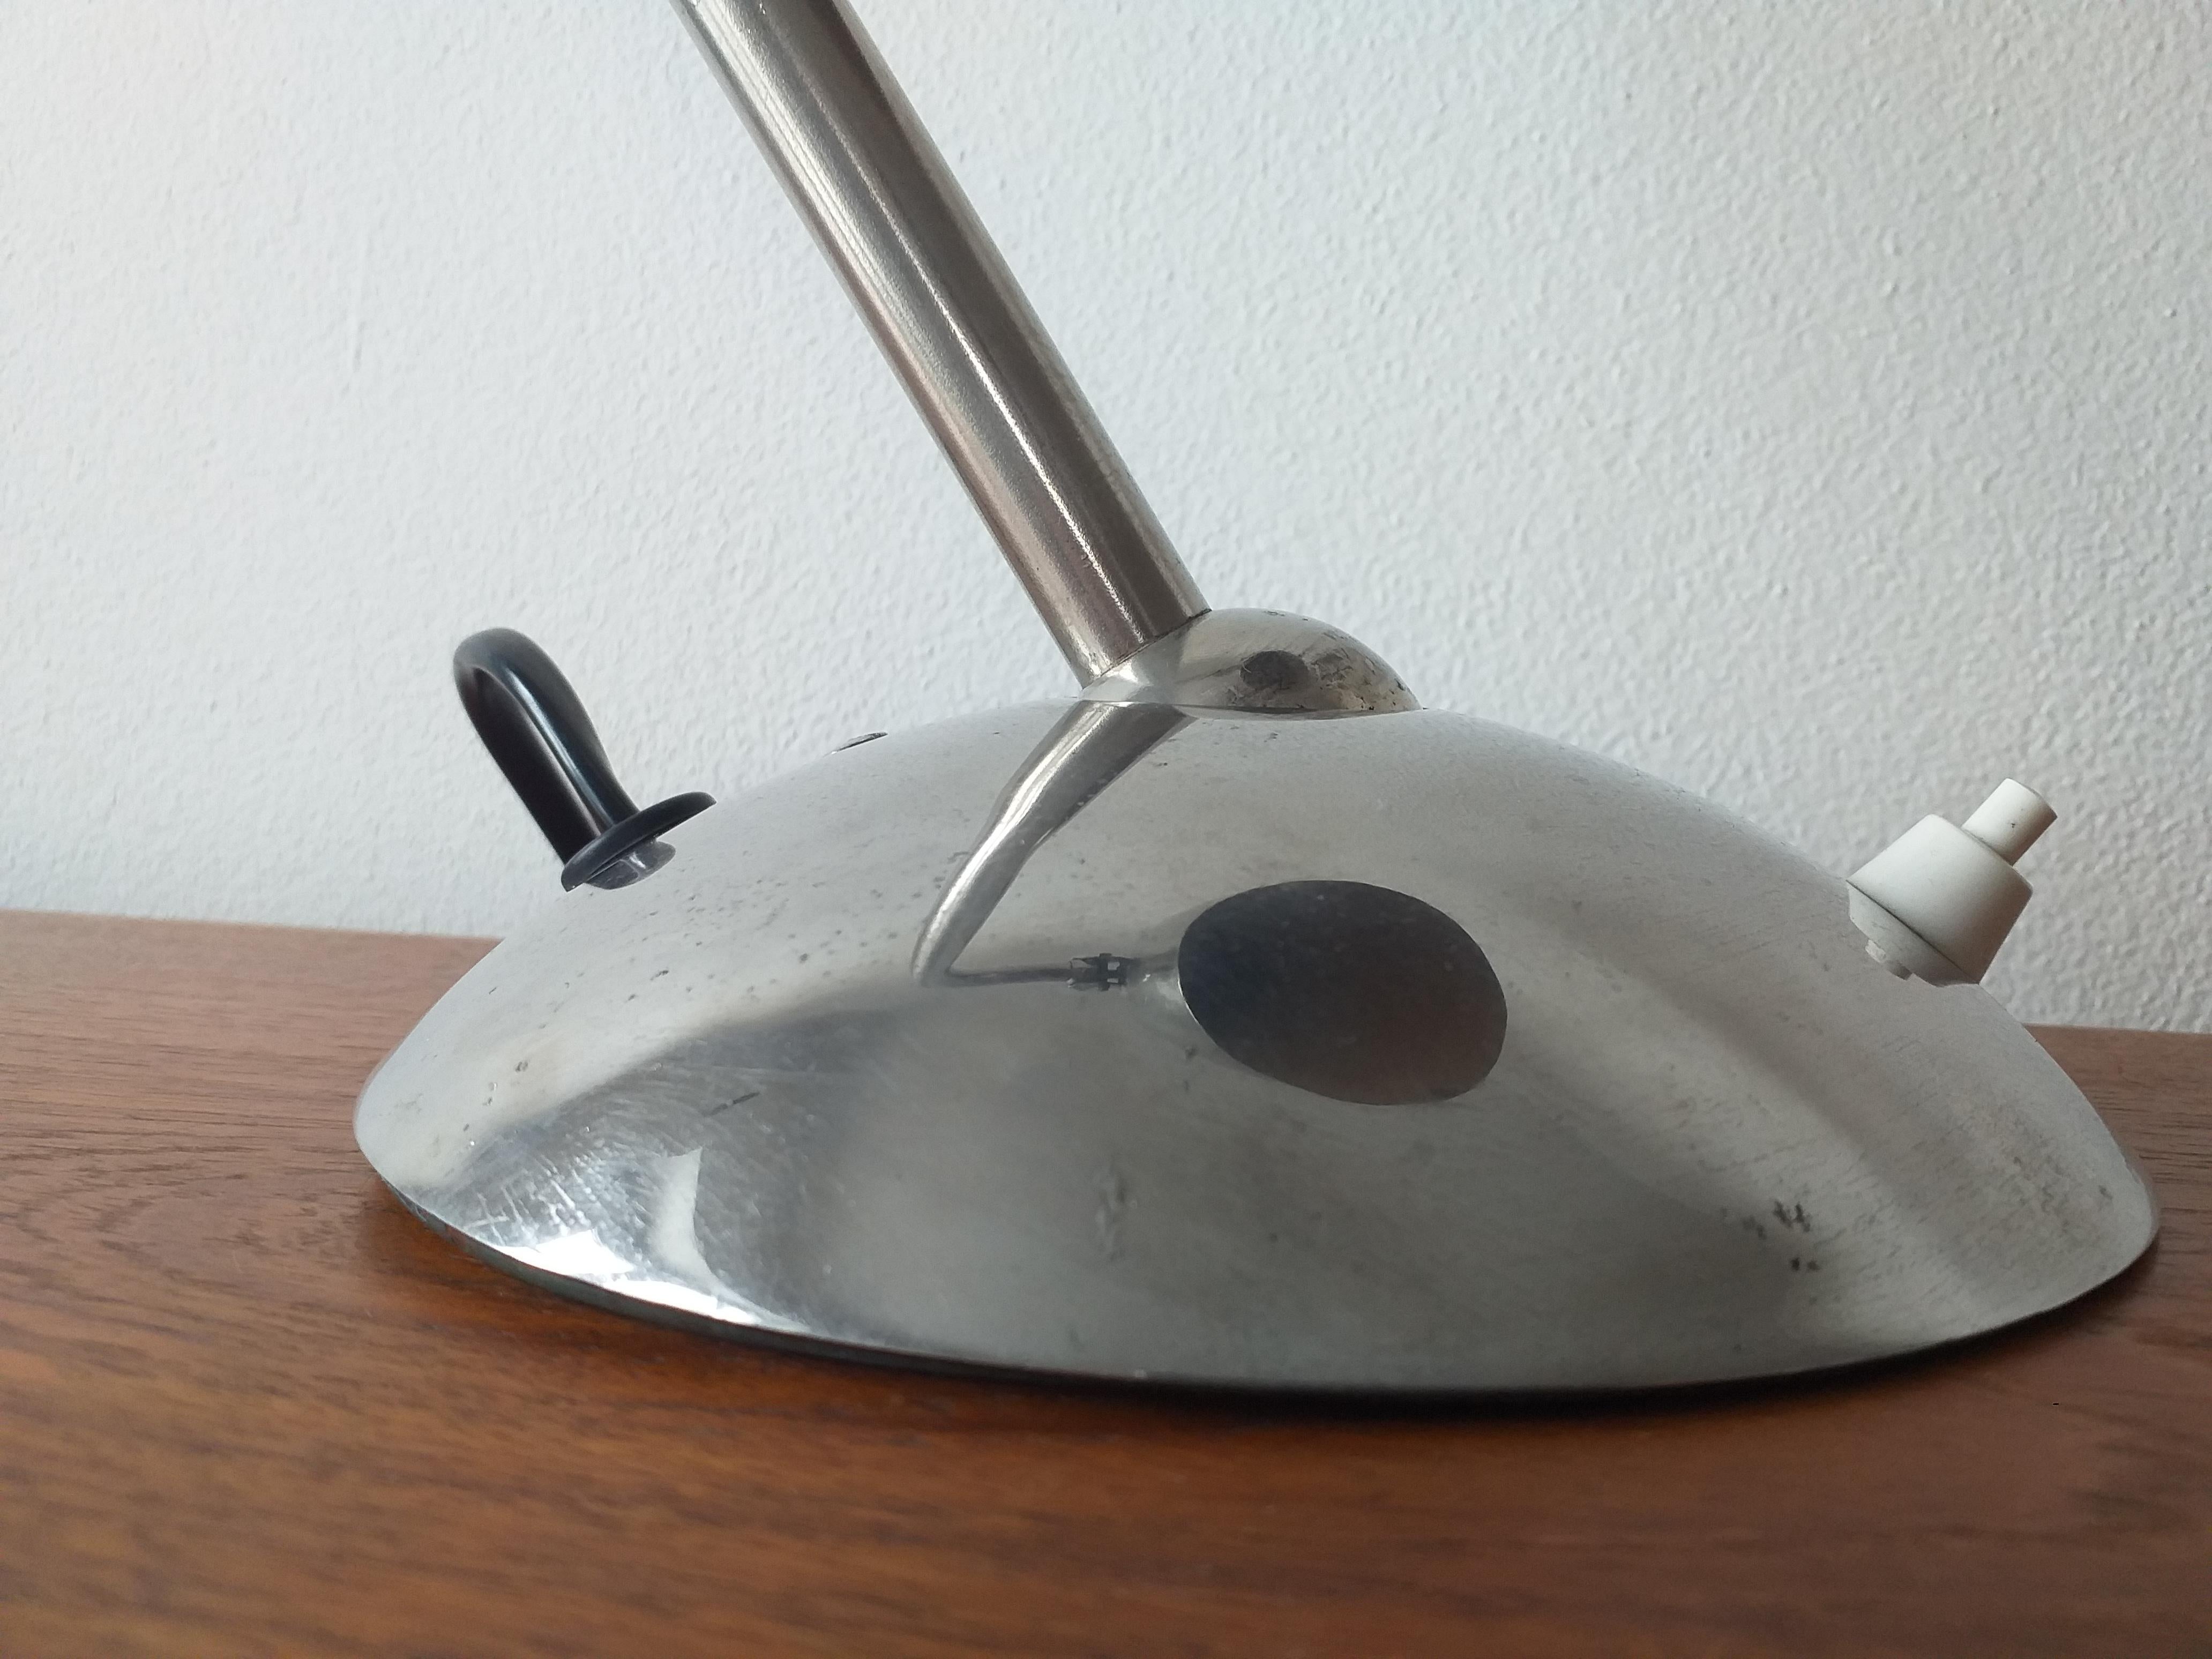 Art Deco, Functionalism, Bauhaus Table Lamp, Franta Anyz, 1930s In Good Condition For Sale In Praha, CZ